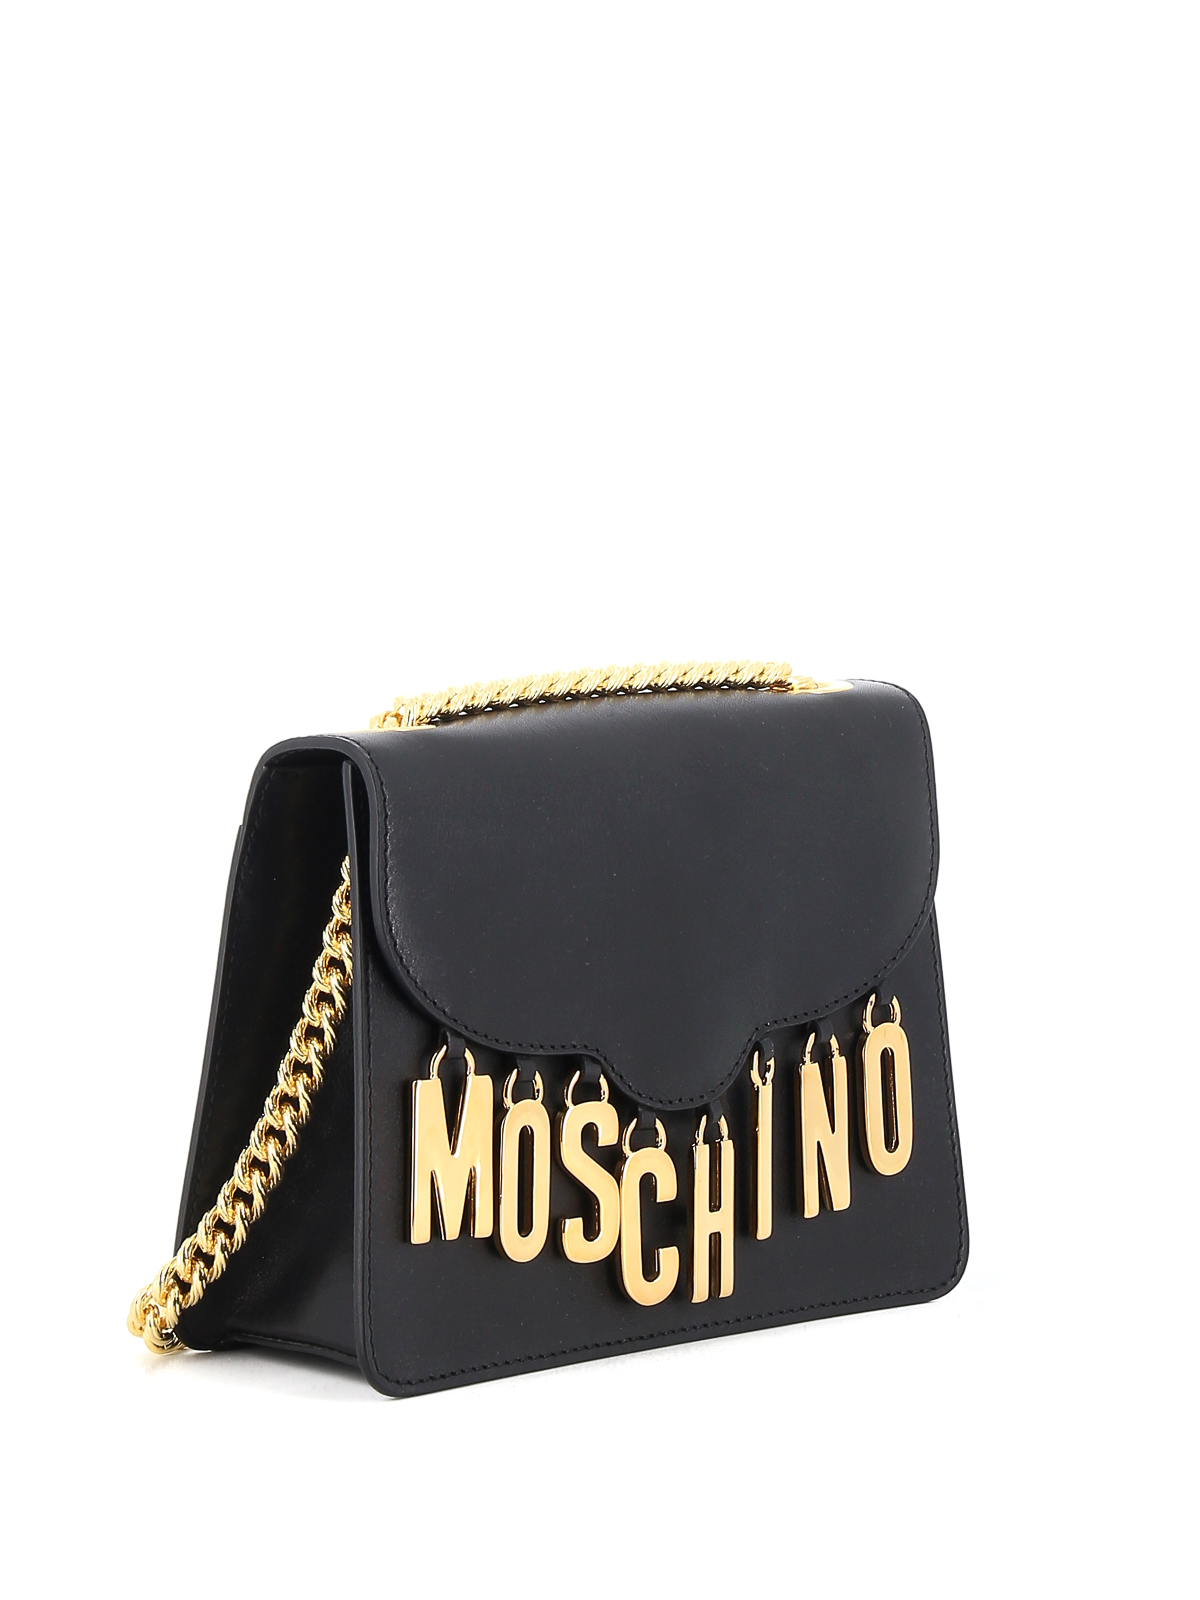 Womens Moschino Bags Best Price - Moschino Clearance Online